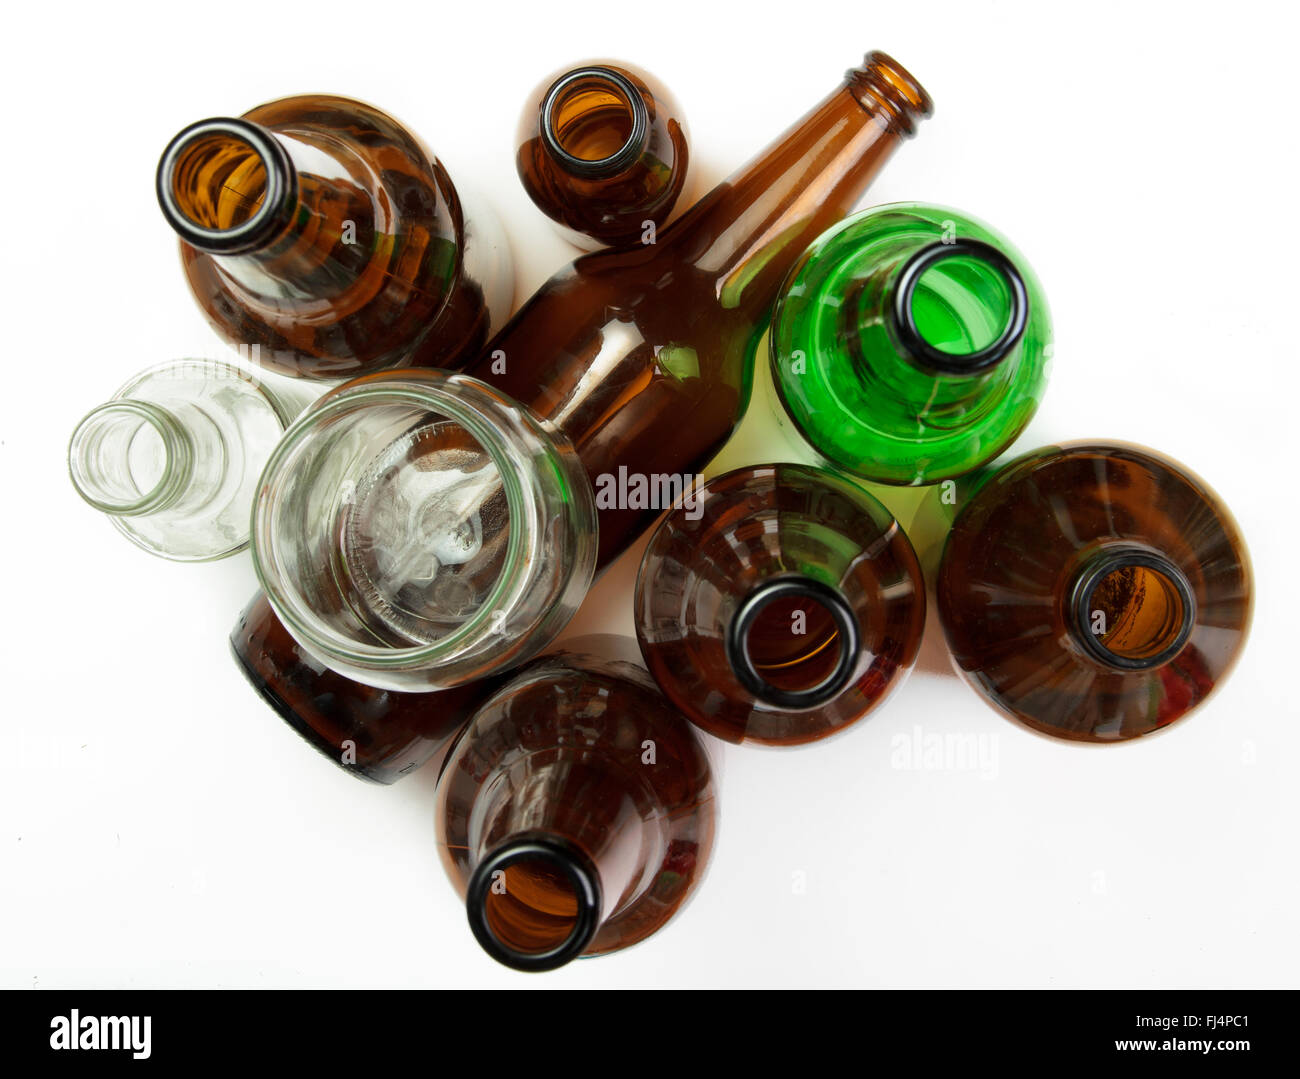 Colorful glass bottles and jars on white background Stock Photo